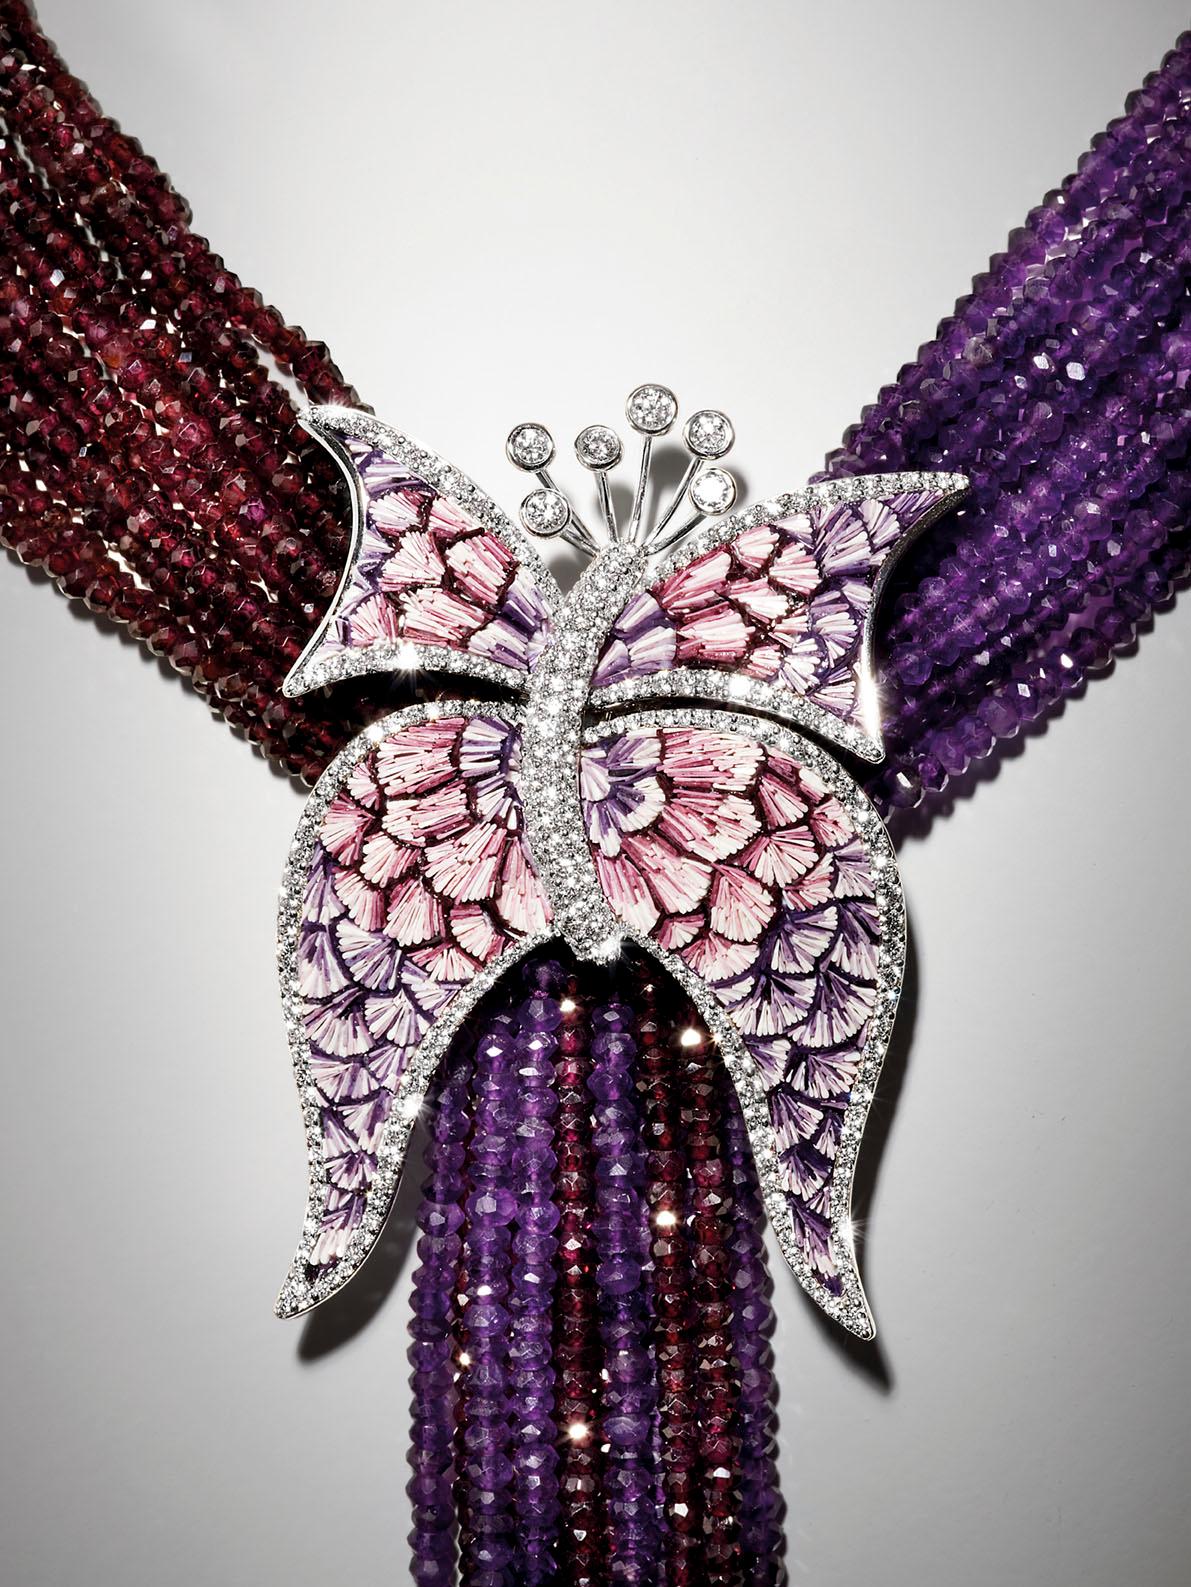 Brilliant Cut Necklace White Gold White Diamonds Amethyst Garnet Hand Decorated Micro Mosaic For Sale